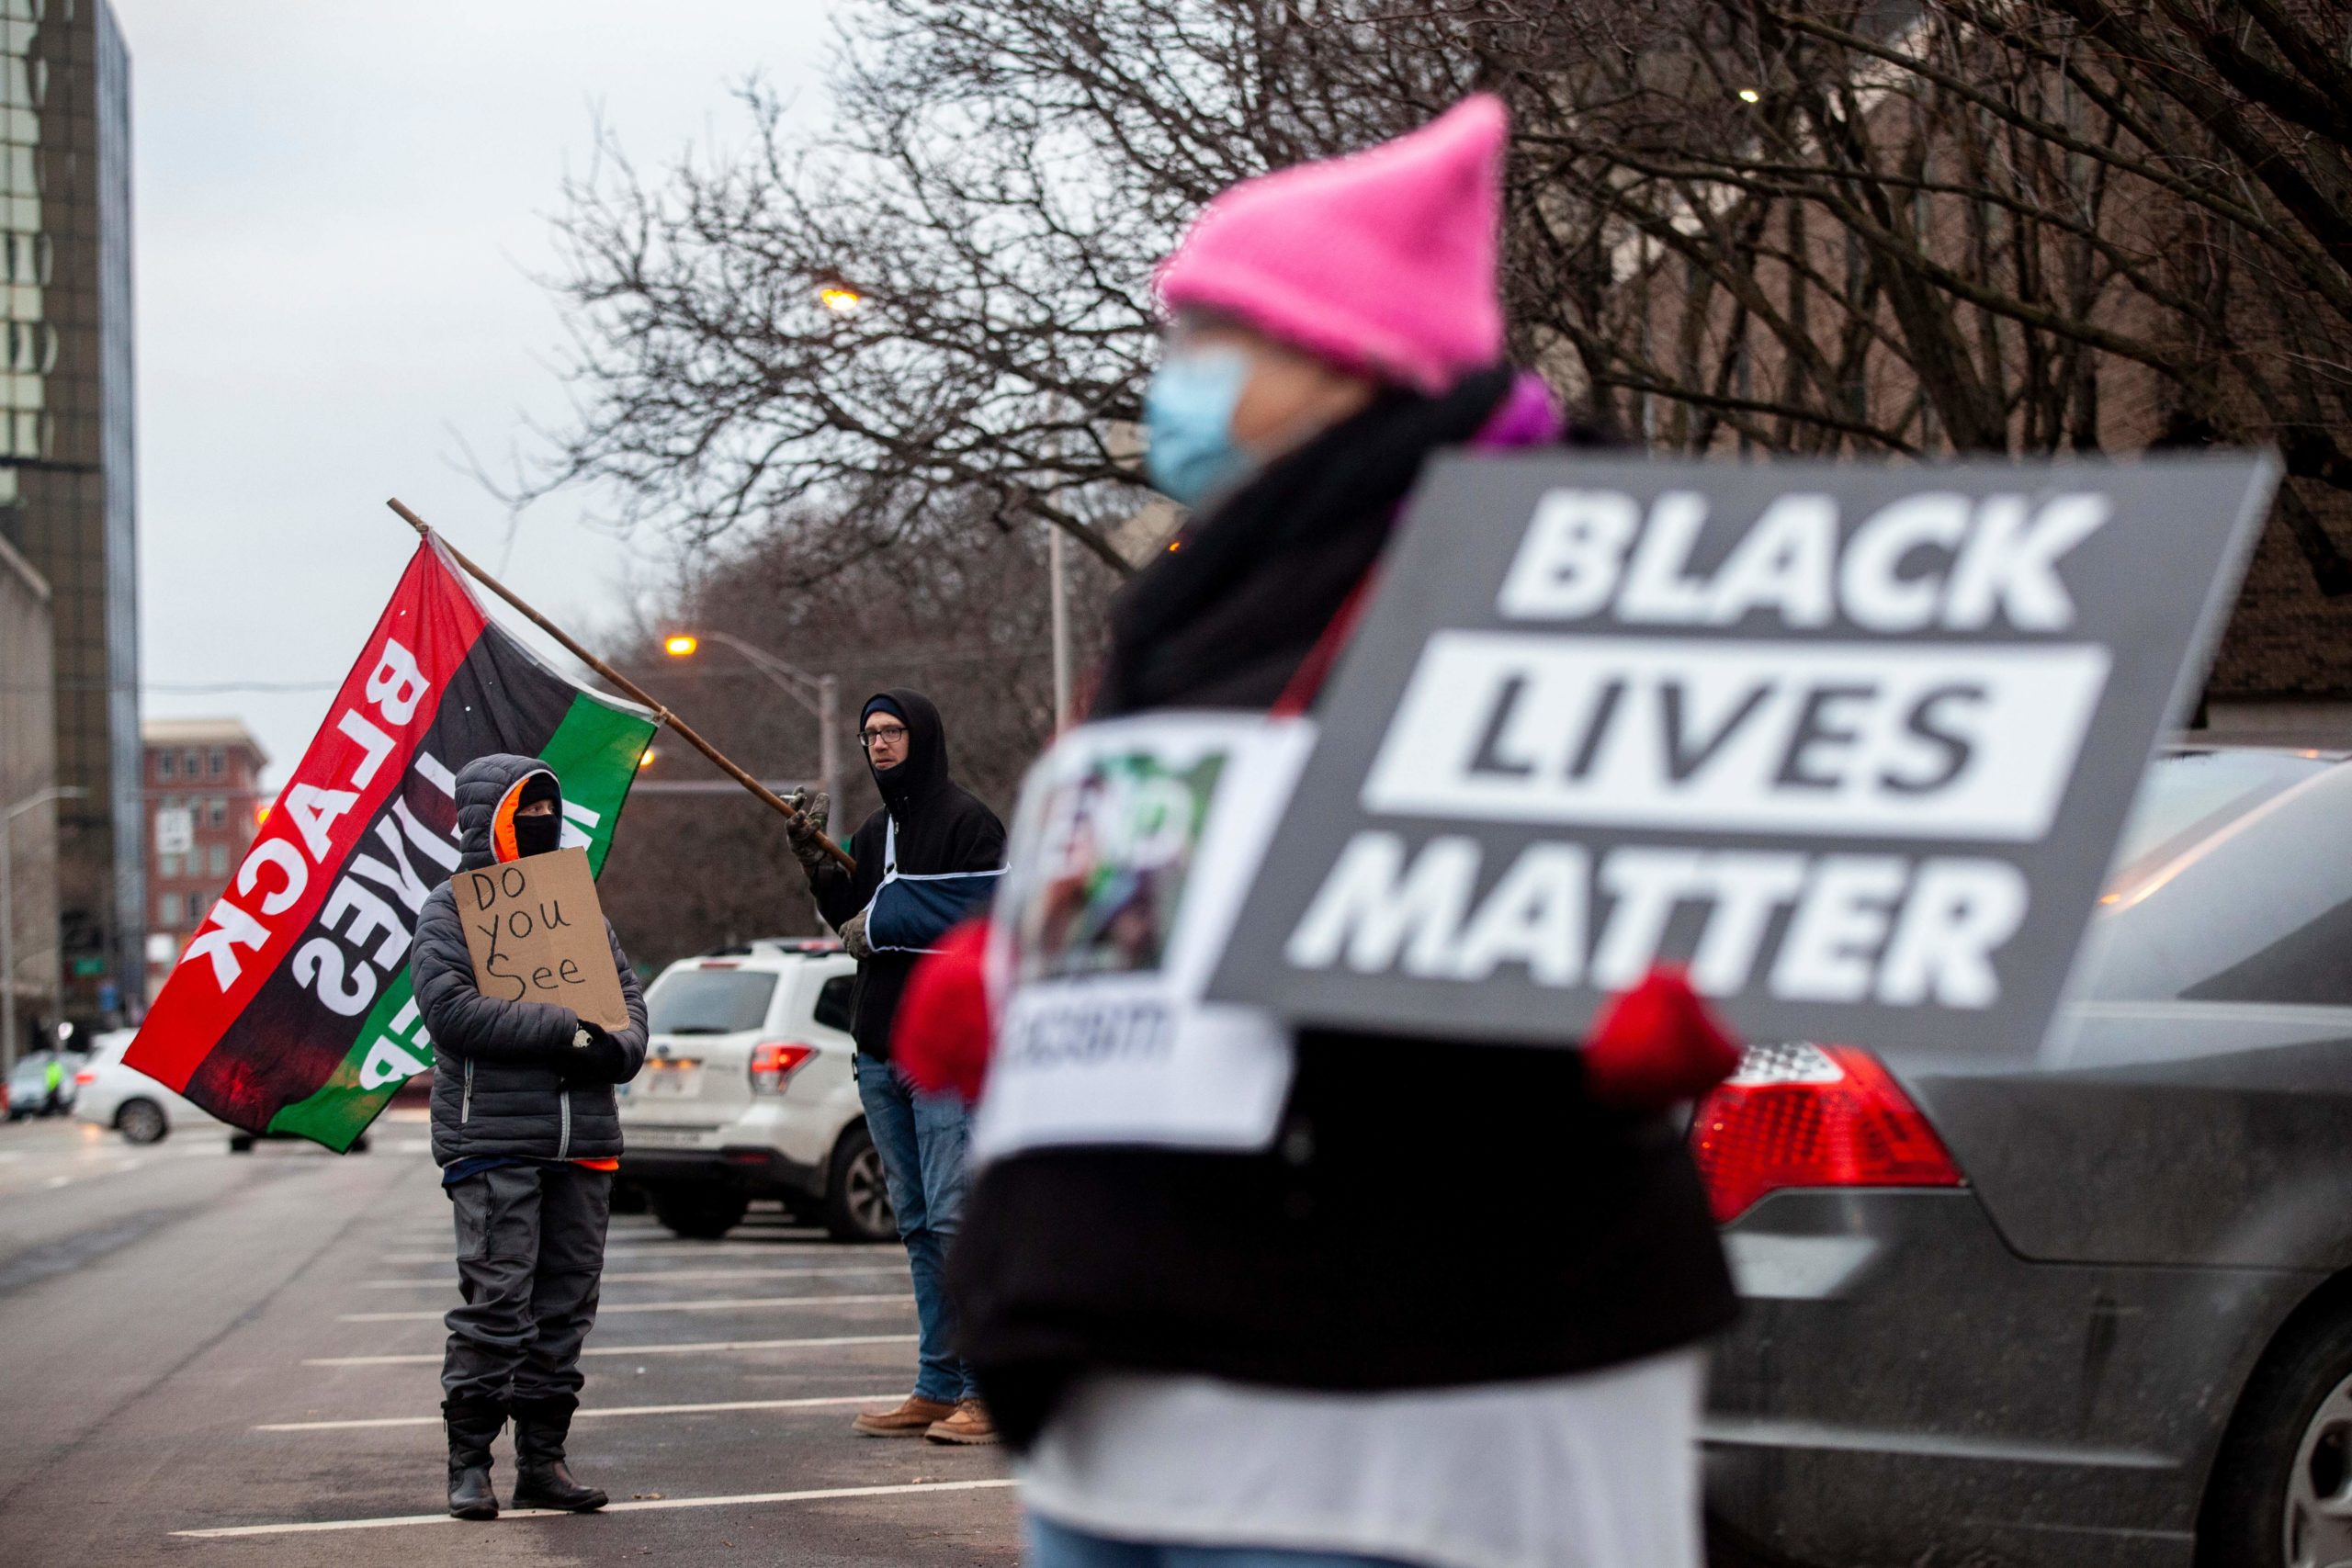 Protesters hold signs and flags during a demonstration against police brutality in front of the Fraternal Order of Police in Columbus, Ohio on December 28, 2020. - A white police officer who shot dead a Black man in Columbus, Ohio, last week was fired on December 28, city officials said. The death of Andre Maurice Hill triggered outrage in a country that has been racked by protests against police brutality and systemic racism since the spring. (Photo by STEPHEN ZENNER / AFP) (Photo by STEPHEN ZENNER/AFP via Getty Images)